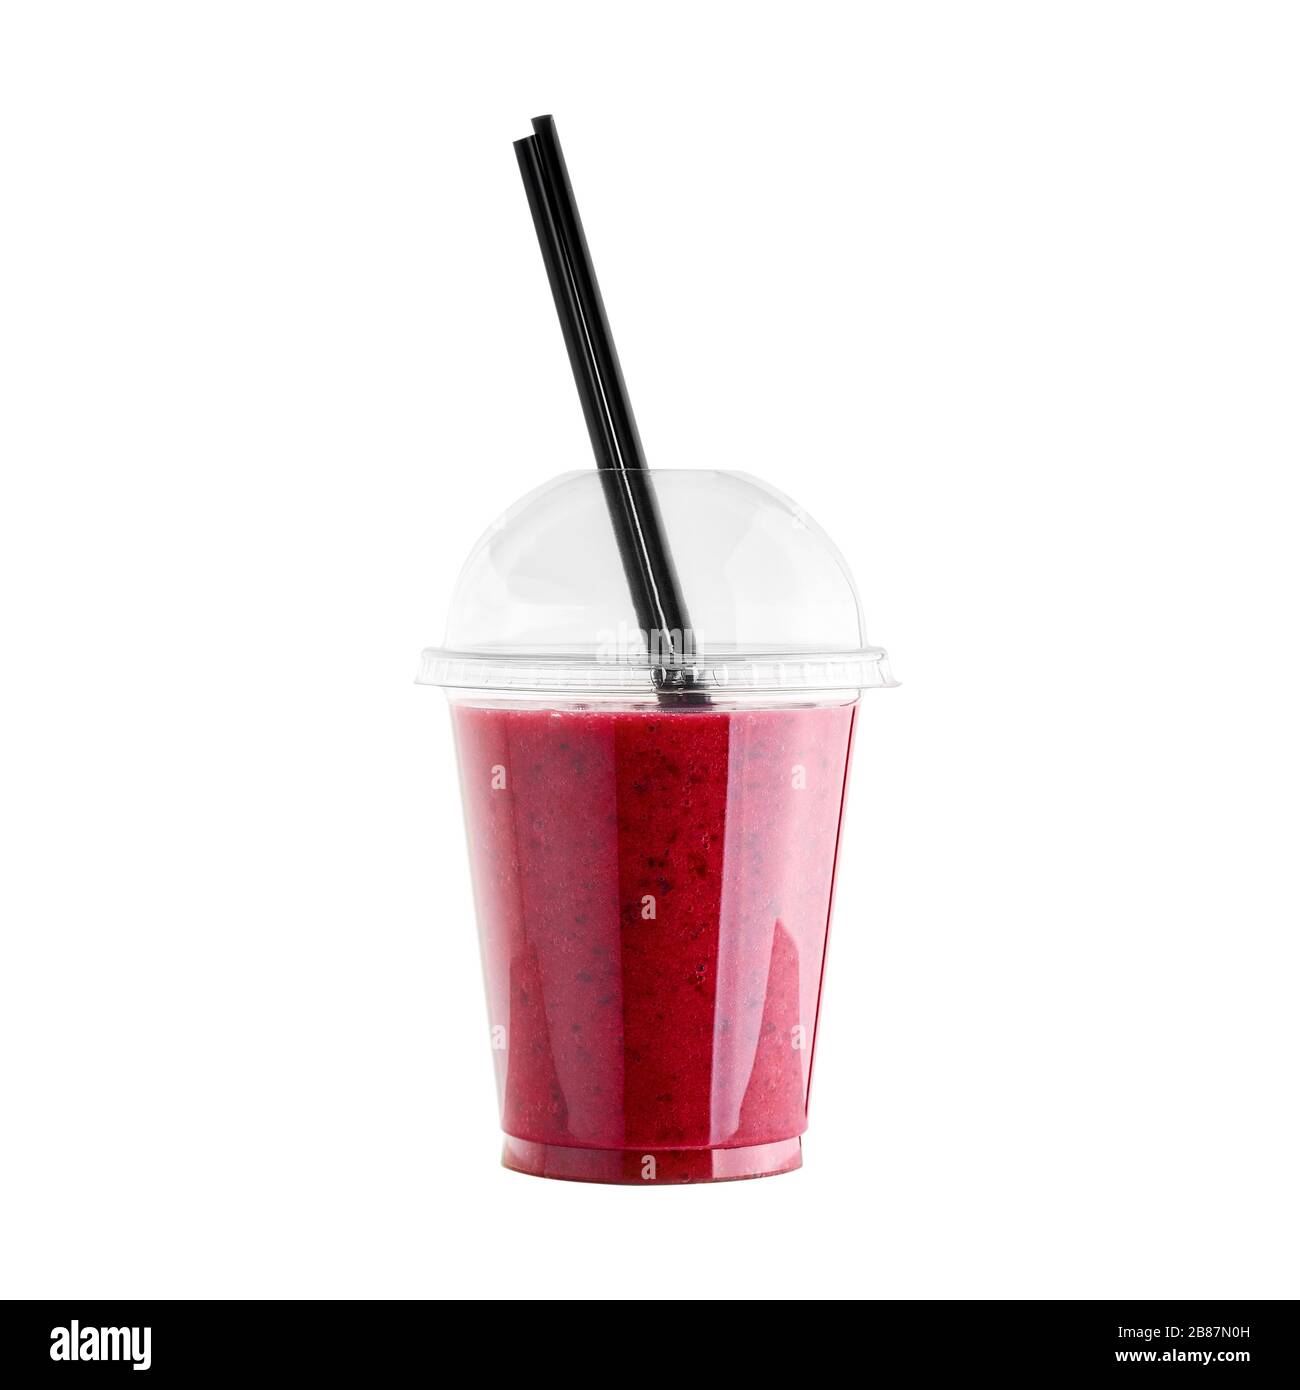 https://c8.alamy.com/comp/2B87N0H/red-strawberry-smoothie-in-plastic-cup-with-straw-isolated-on-white-background-berry-healthy-beverage-detox-drink-2B87N0H.jpg